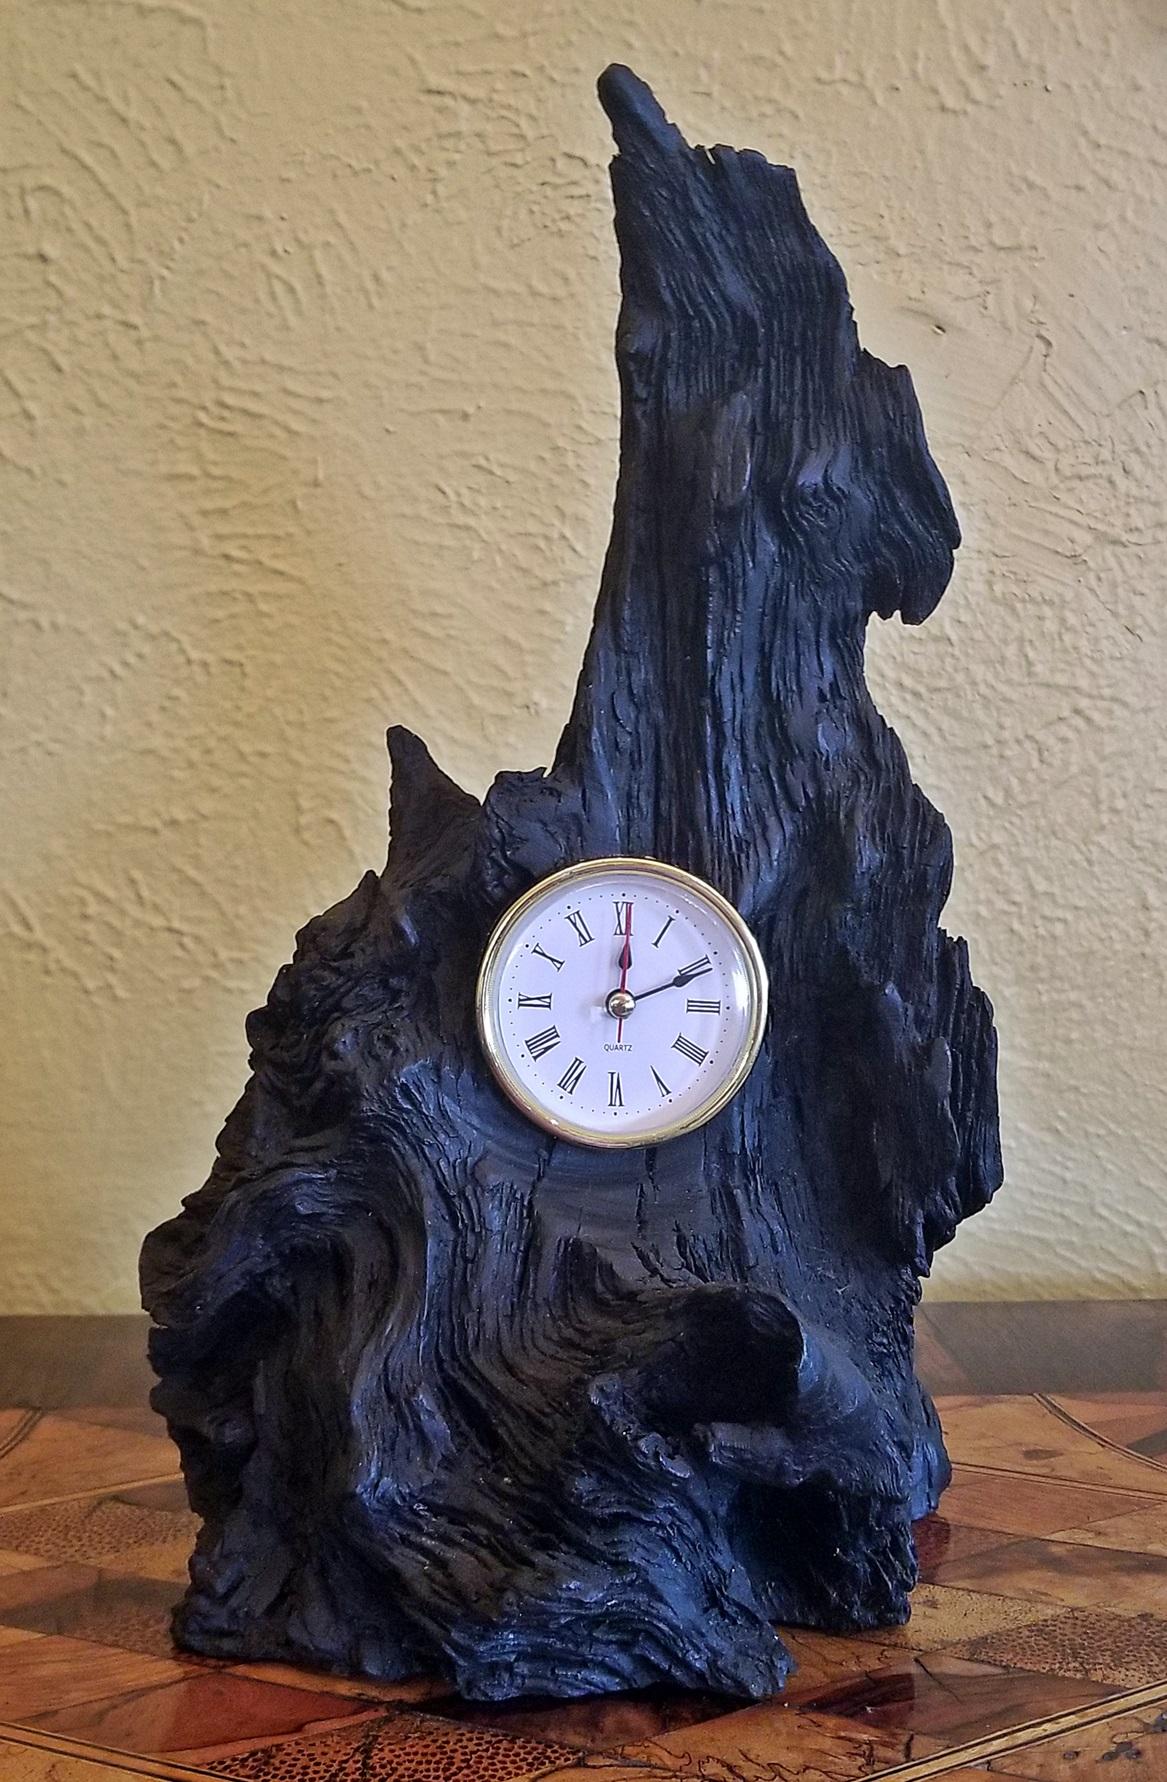 Do you want to own something that is 500 years old???

Presenting a Classic piece of Irish Bog Oak, crafted into a Clock.

Modern quartz clock insert in perfect working condition.

Made in the last 20 years, but the bog oak from which it is